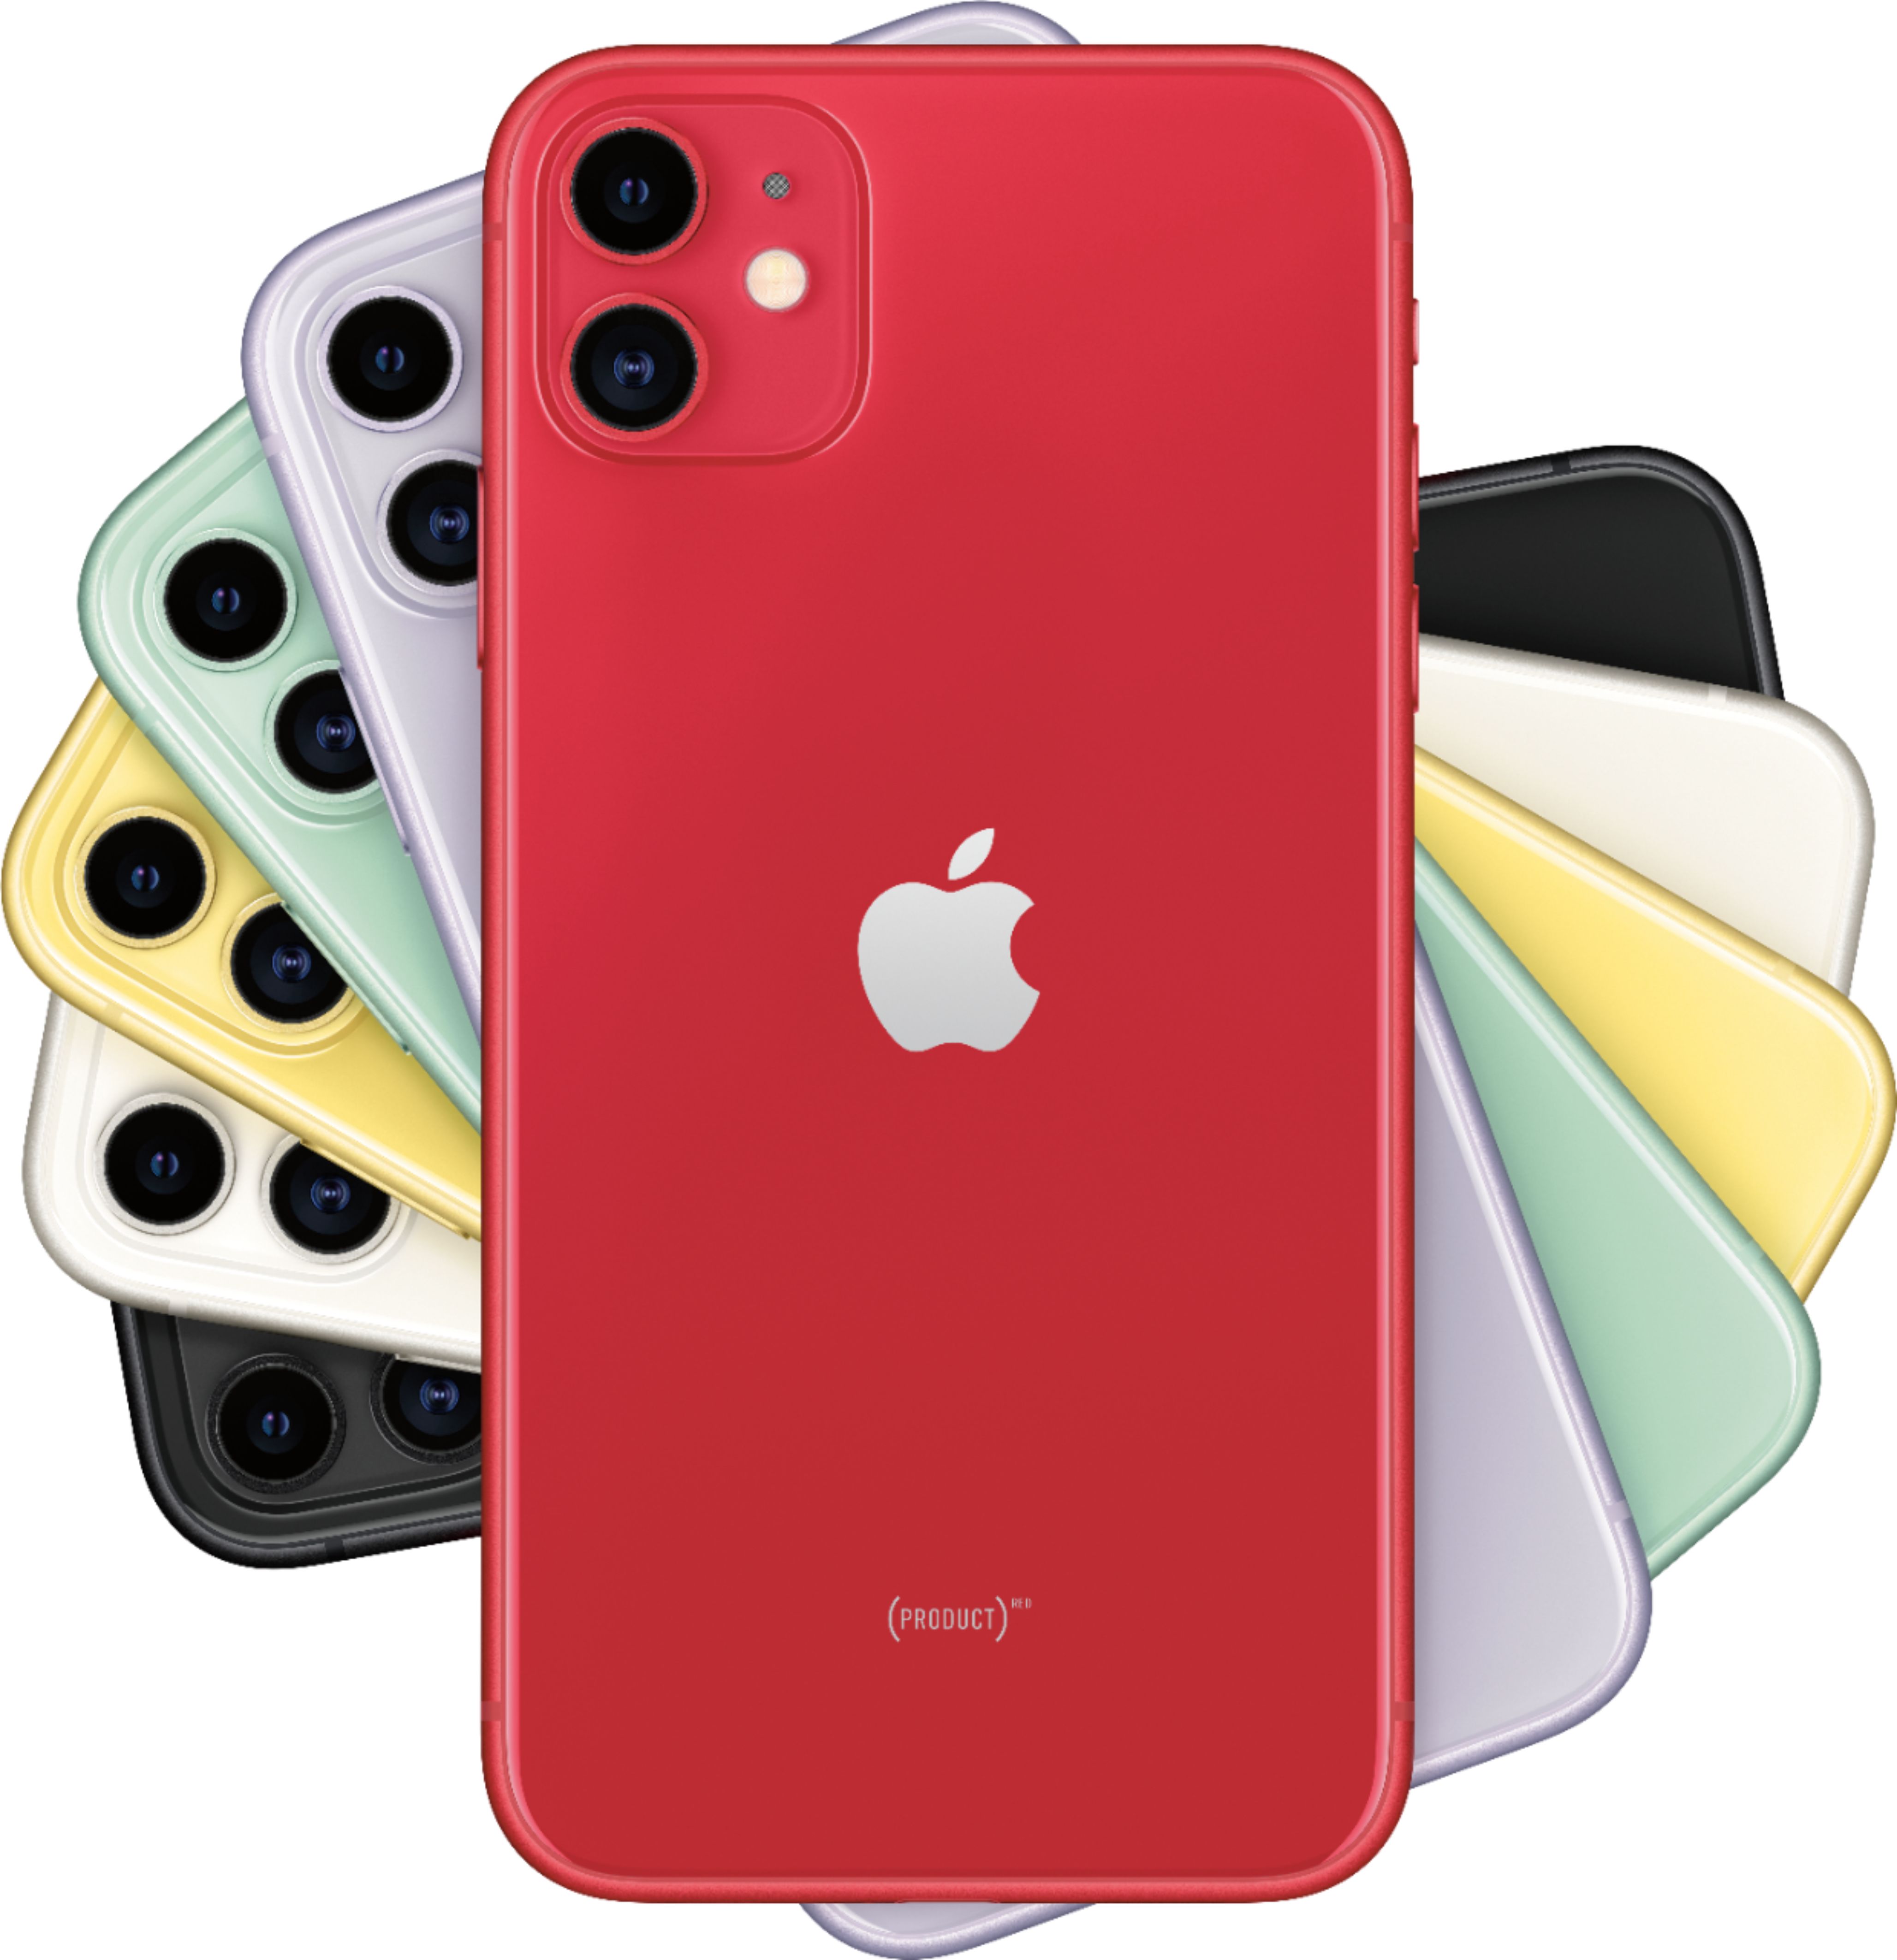 Apple iPhone 11 with 64GB Memory Cell Phone (Unlocked) (PRODUCT)RED - Best Buy